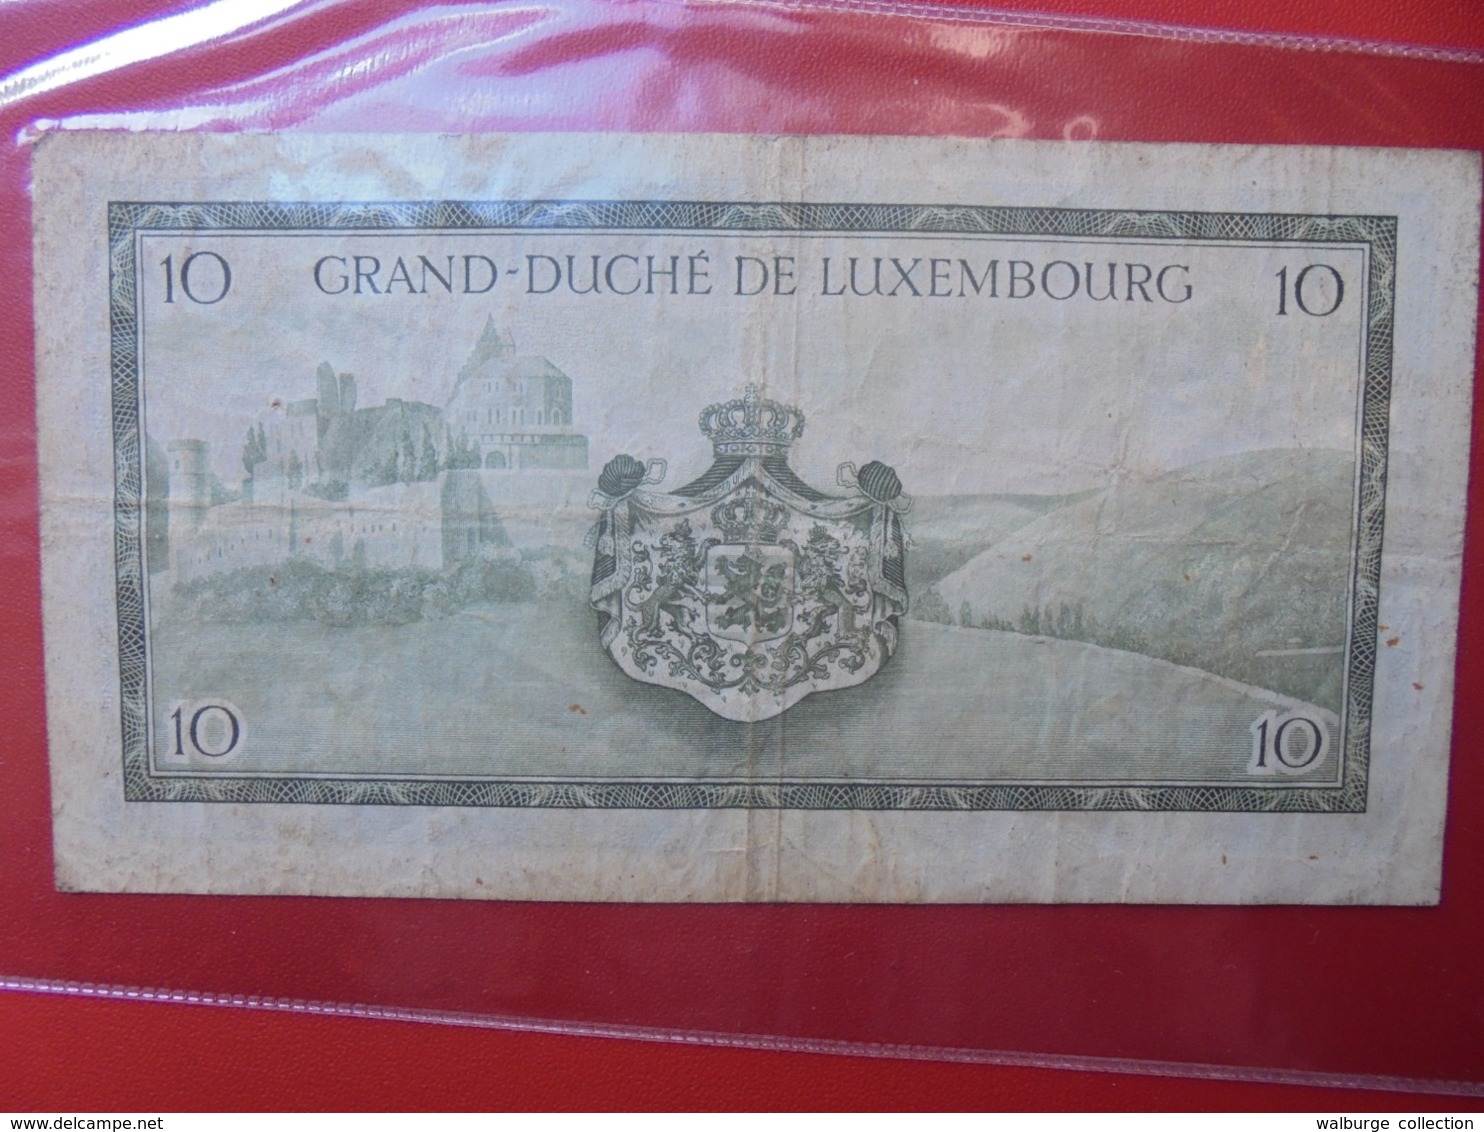 LUXEMBOURG 10 FRANCS (NON-DATE) CIRCULER (B.7) - Luxemburg